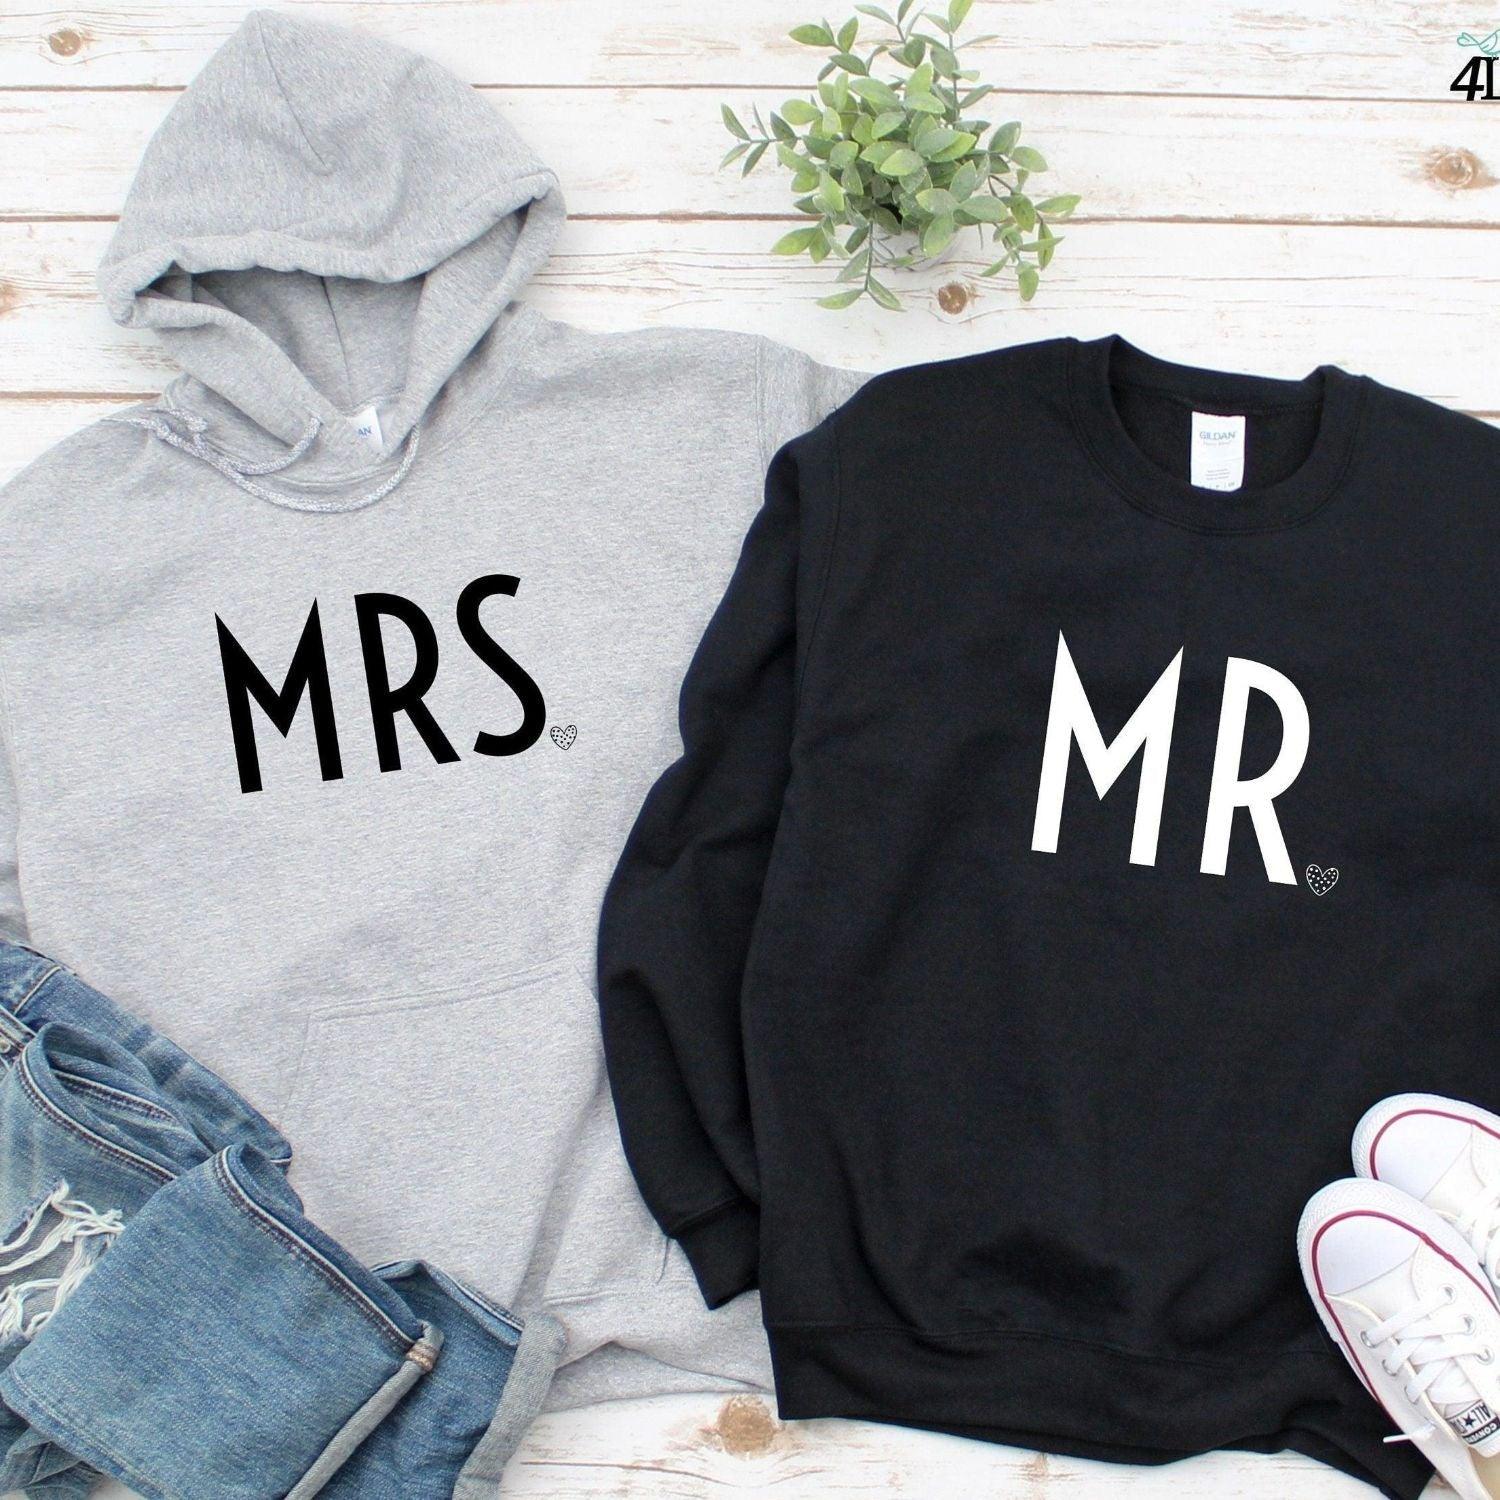 Matching Set - MR & MRS Wedding Gift for Groom & Bride, His & Hers Travel Outfits - 4Lovebirds